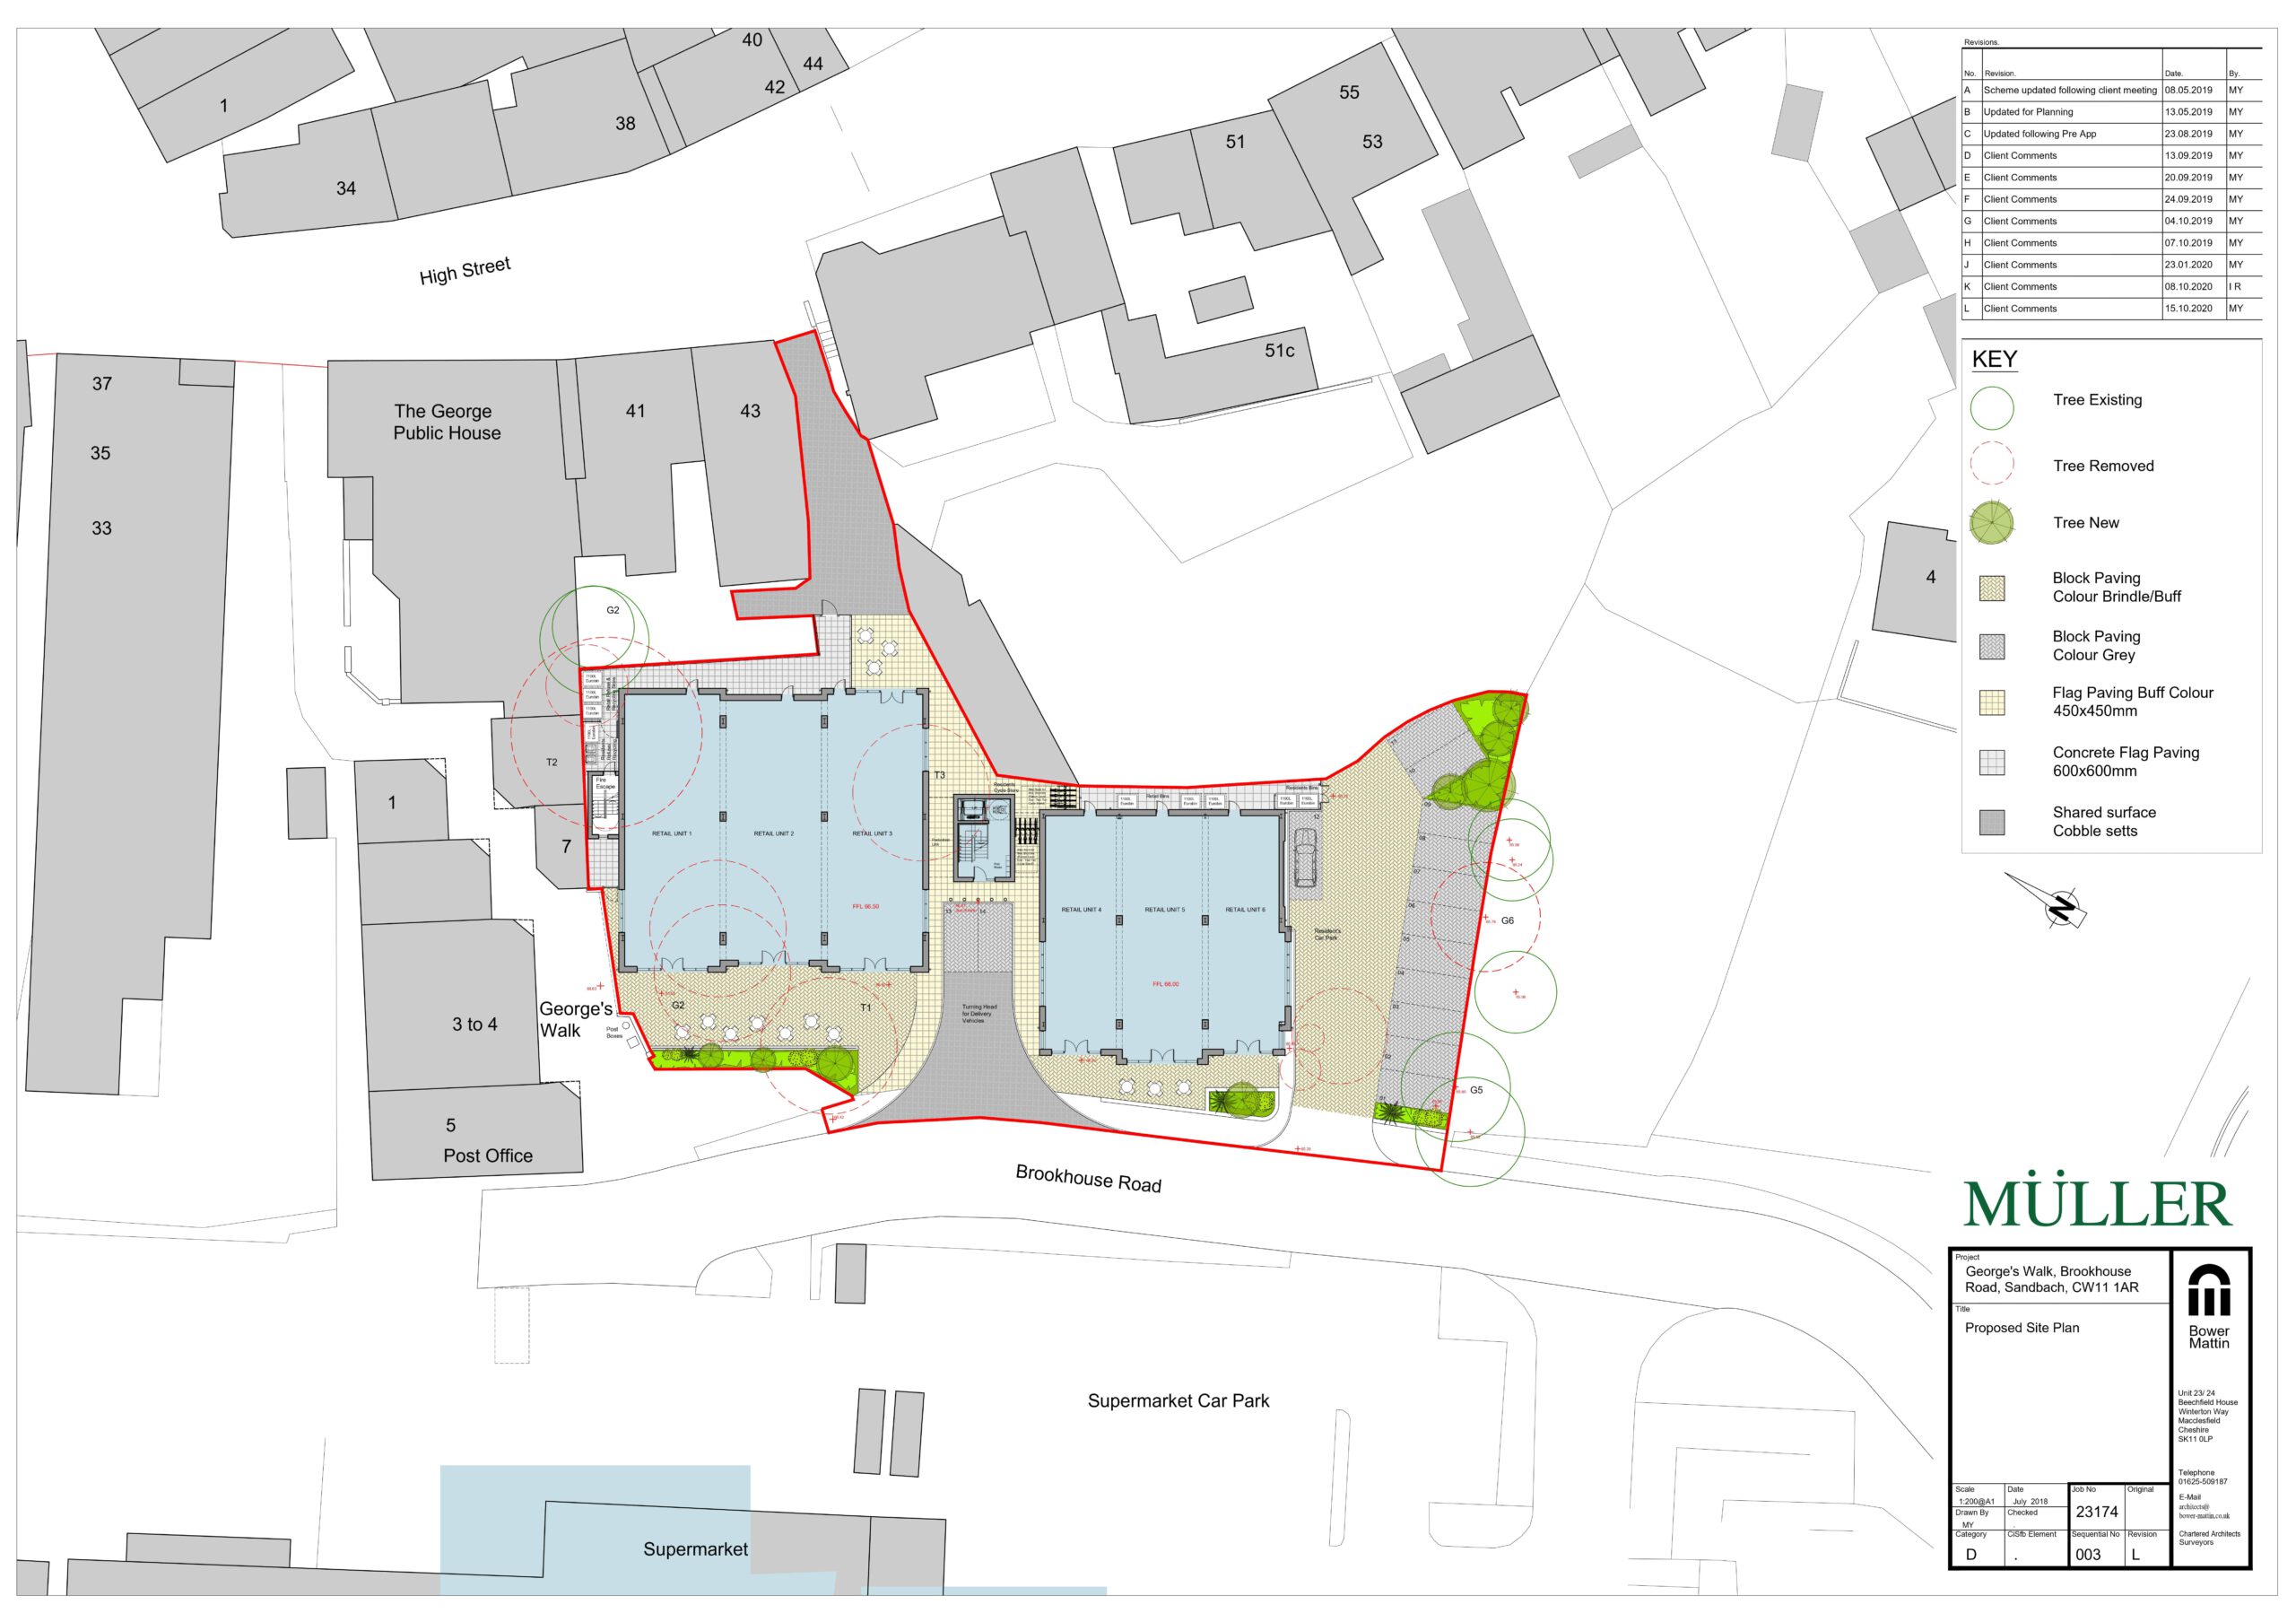 Muller submitted an outline site plan for Brookhouse Road, Sandbach